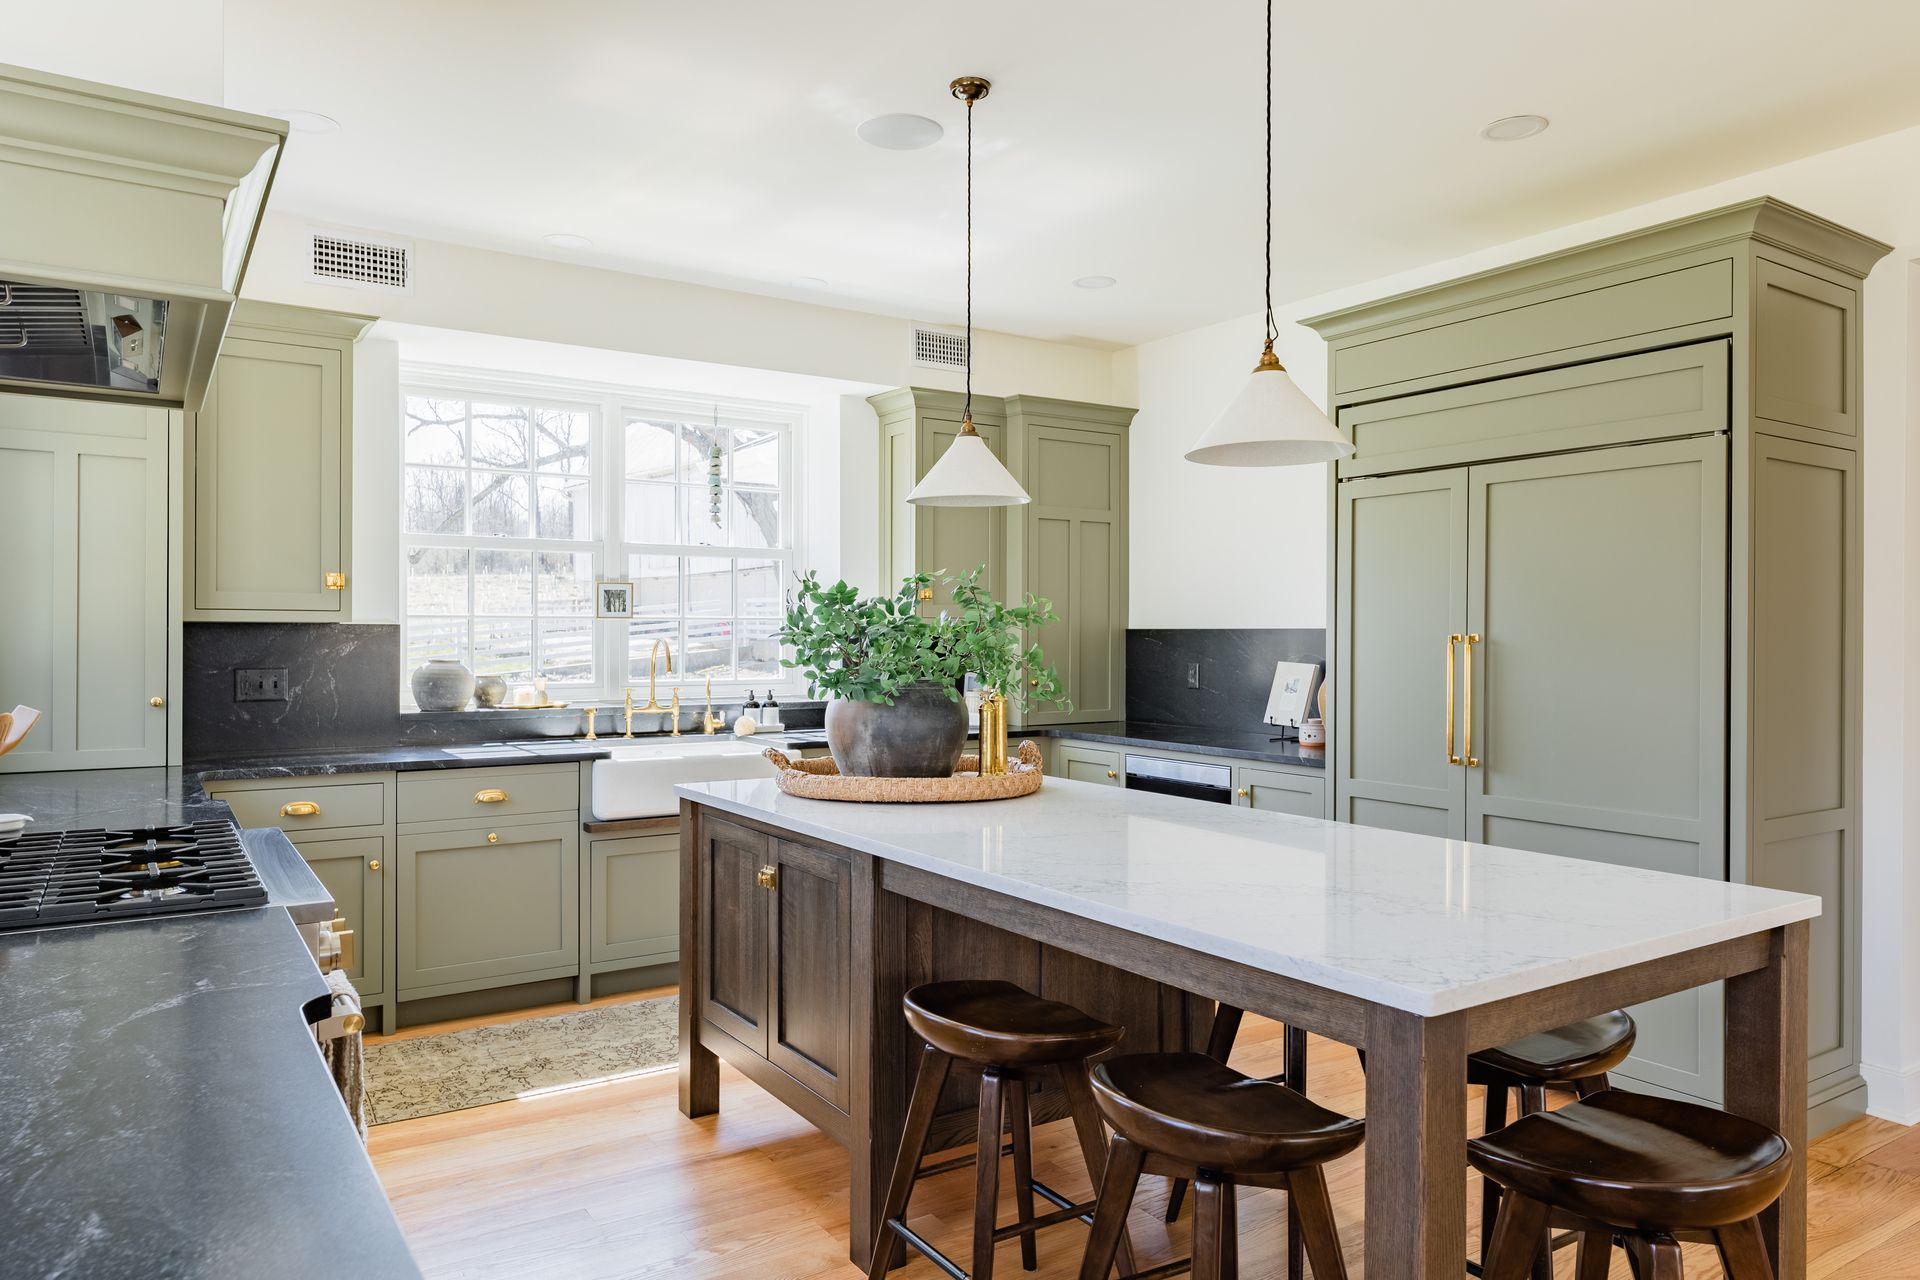 Little Antietam Project – Bespoke farmhouse cabinets designed and installed in kitchen and mudroom.